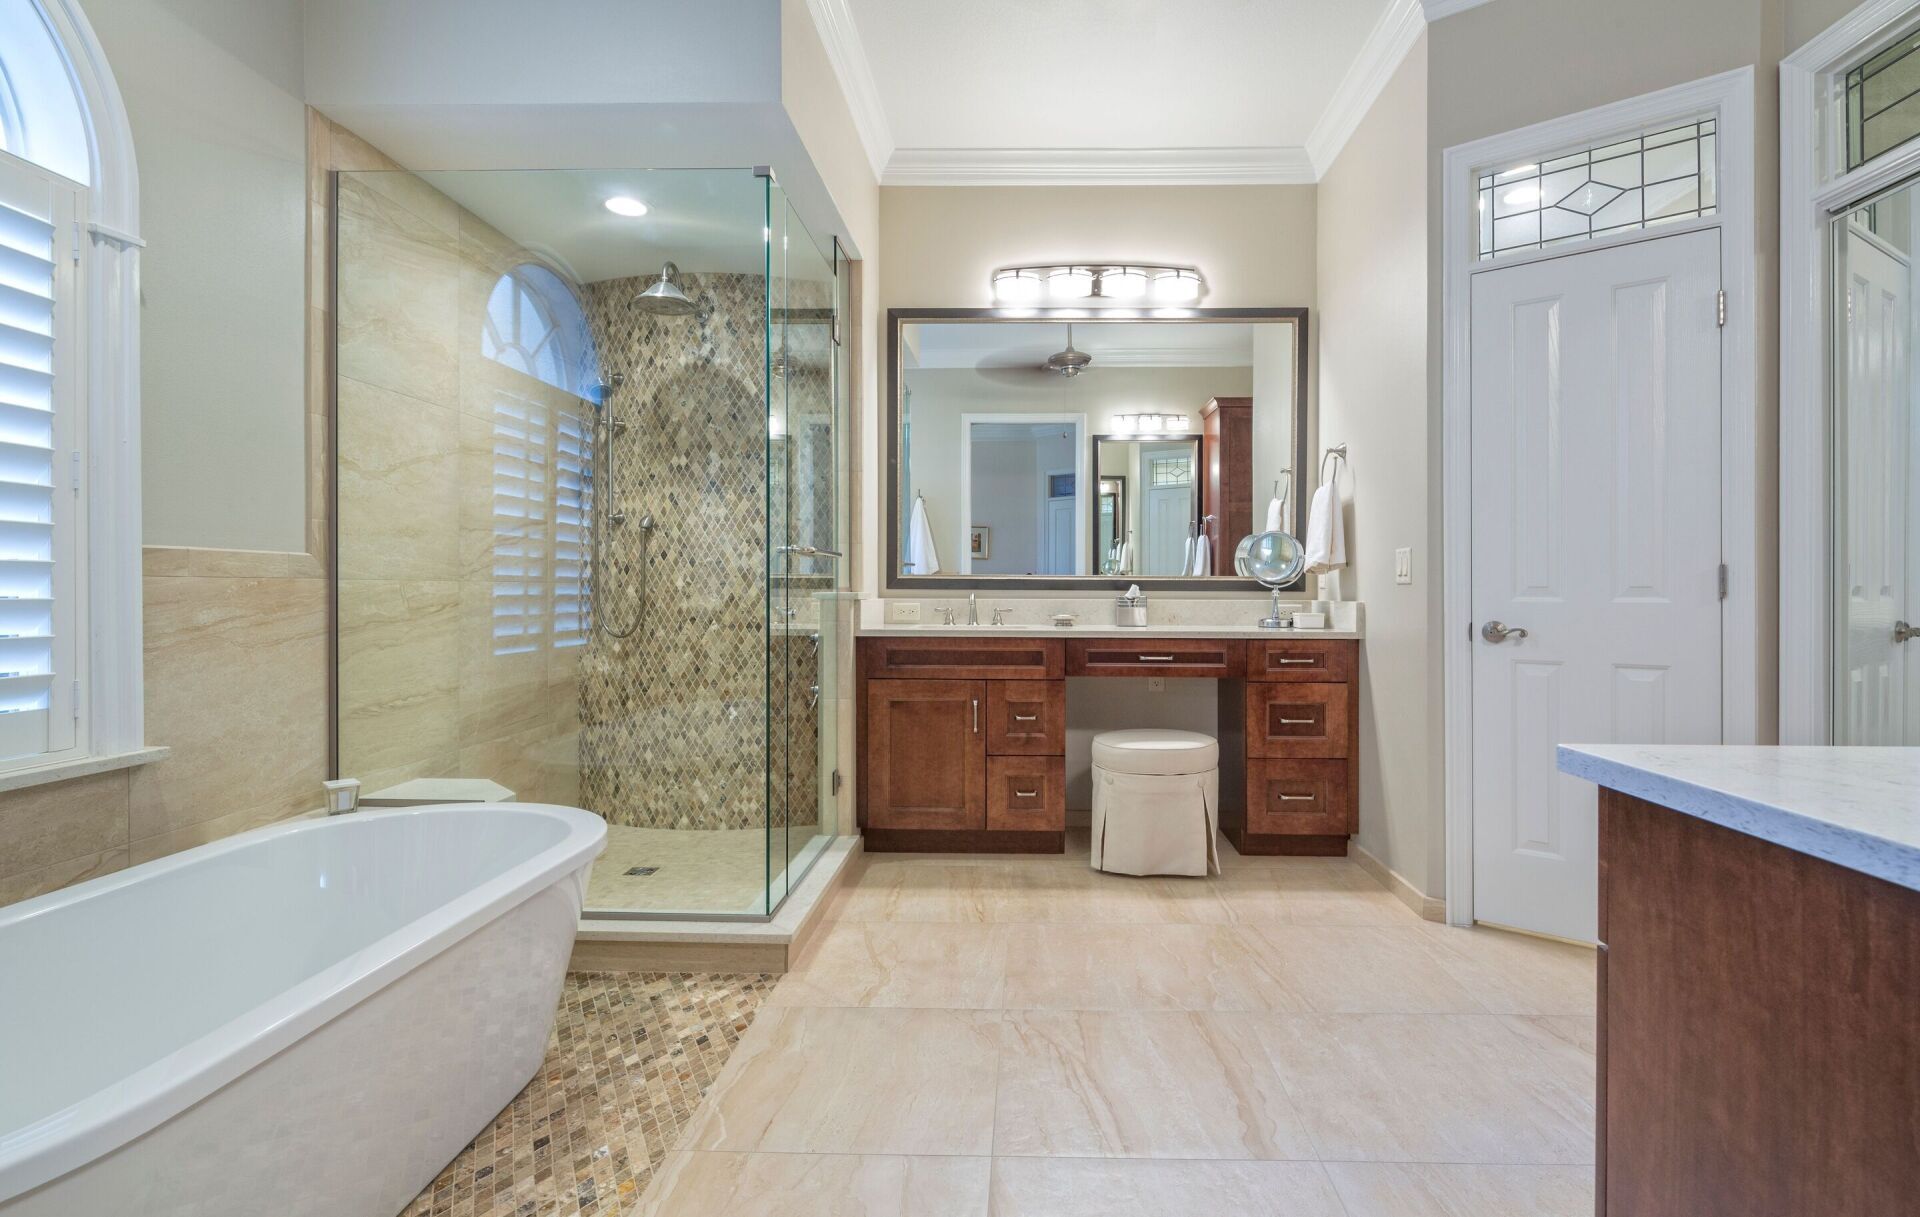 project of a bathroom remodeling austin tx performed by our general contractor